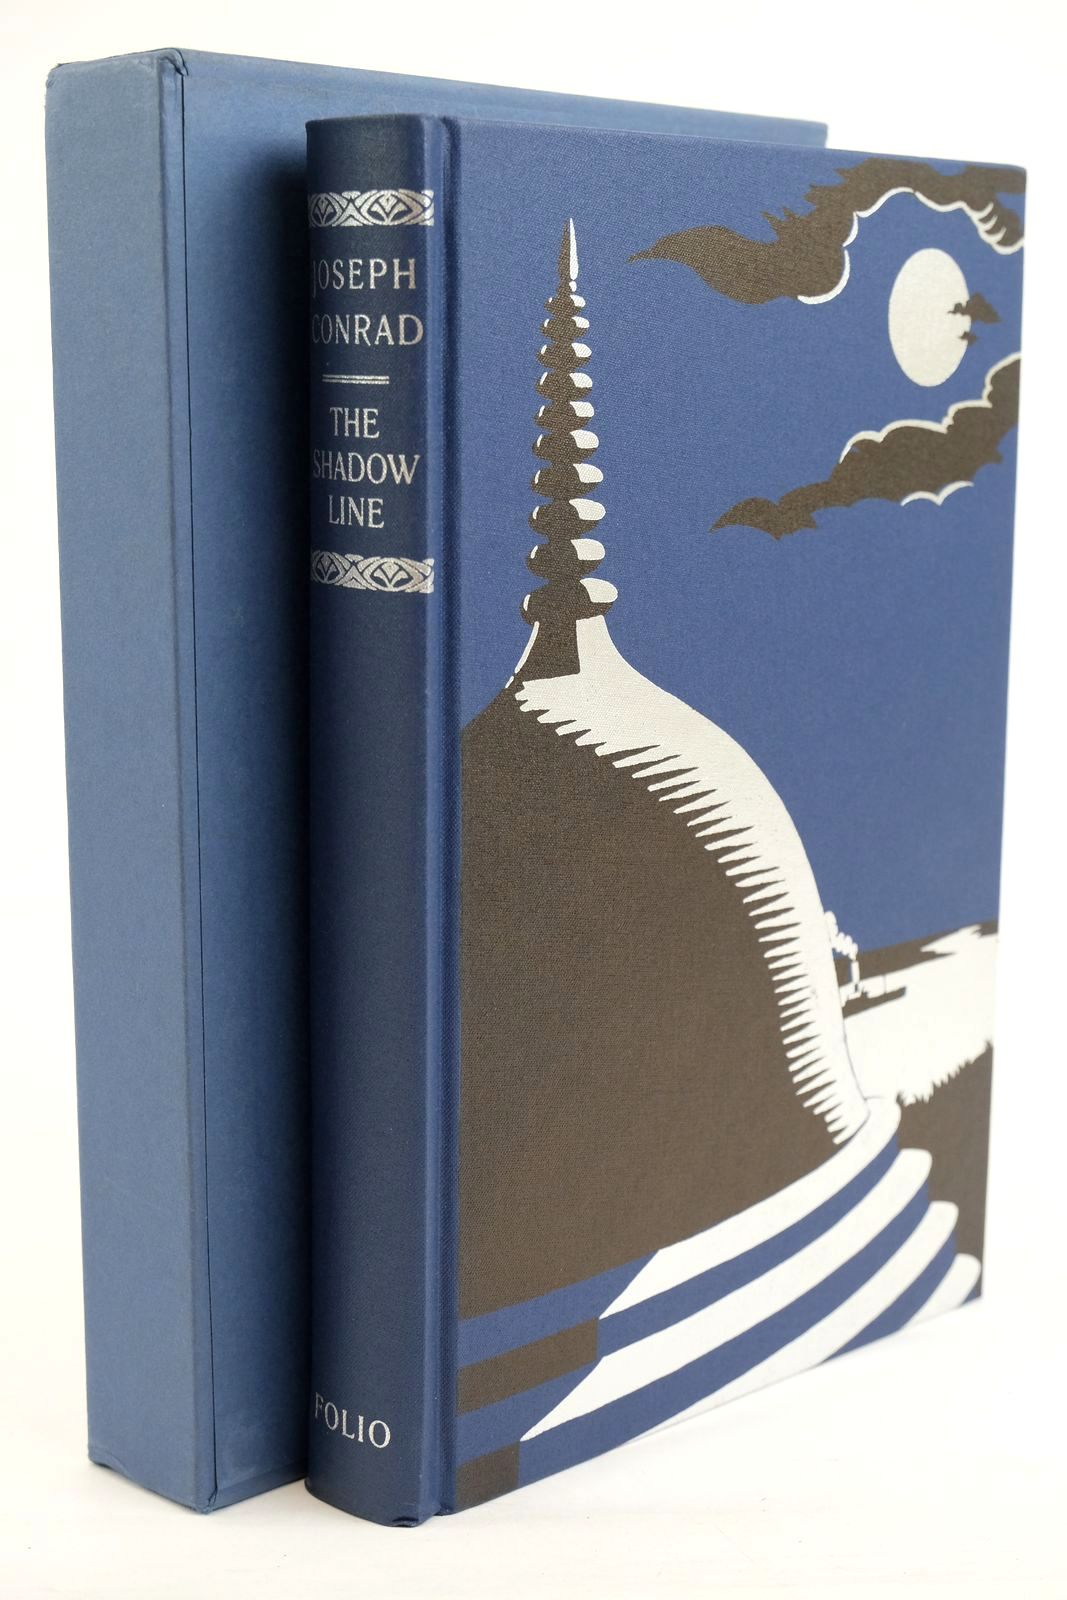 Photo of THE SHADOW-LINE AND WITHIN THE TIDES written by Conrad, Joseph illustrated by Mosley, Francis published by Folio Society (STOCK CODE: 1320394)  for sale by Stella & Rose's Books